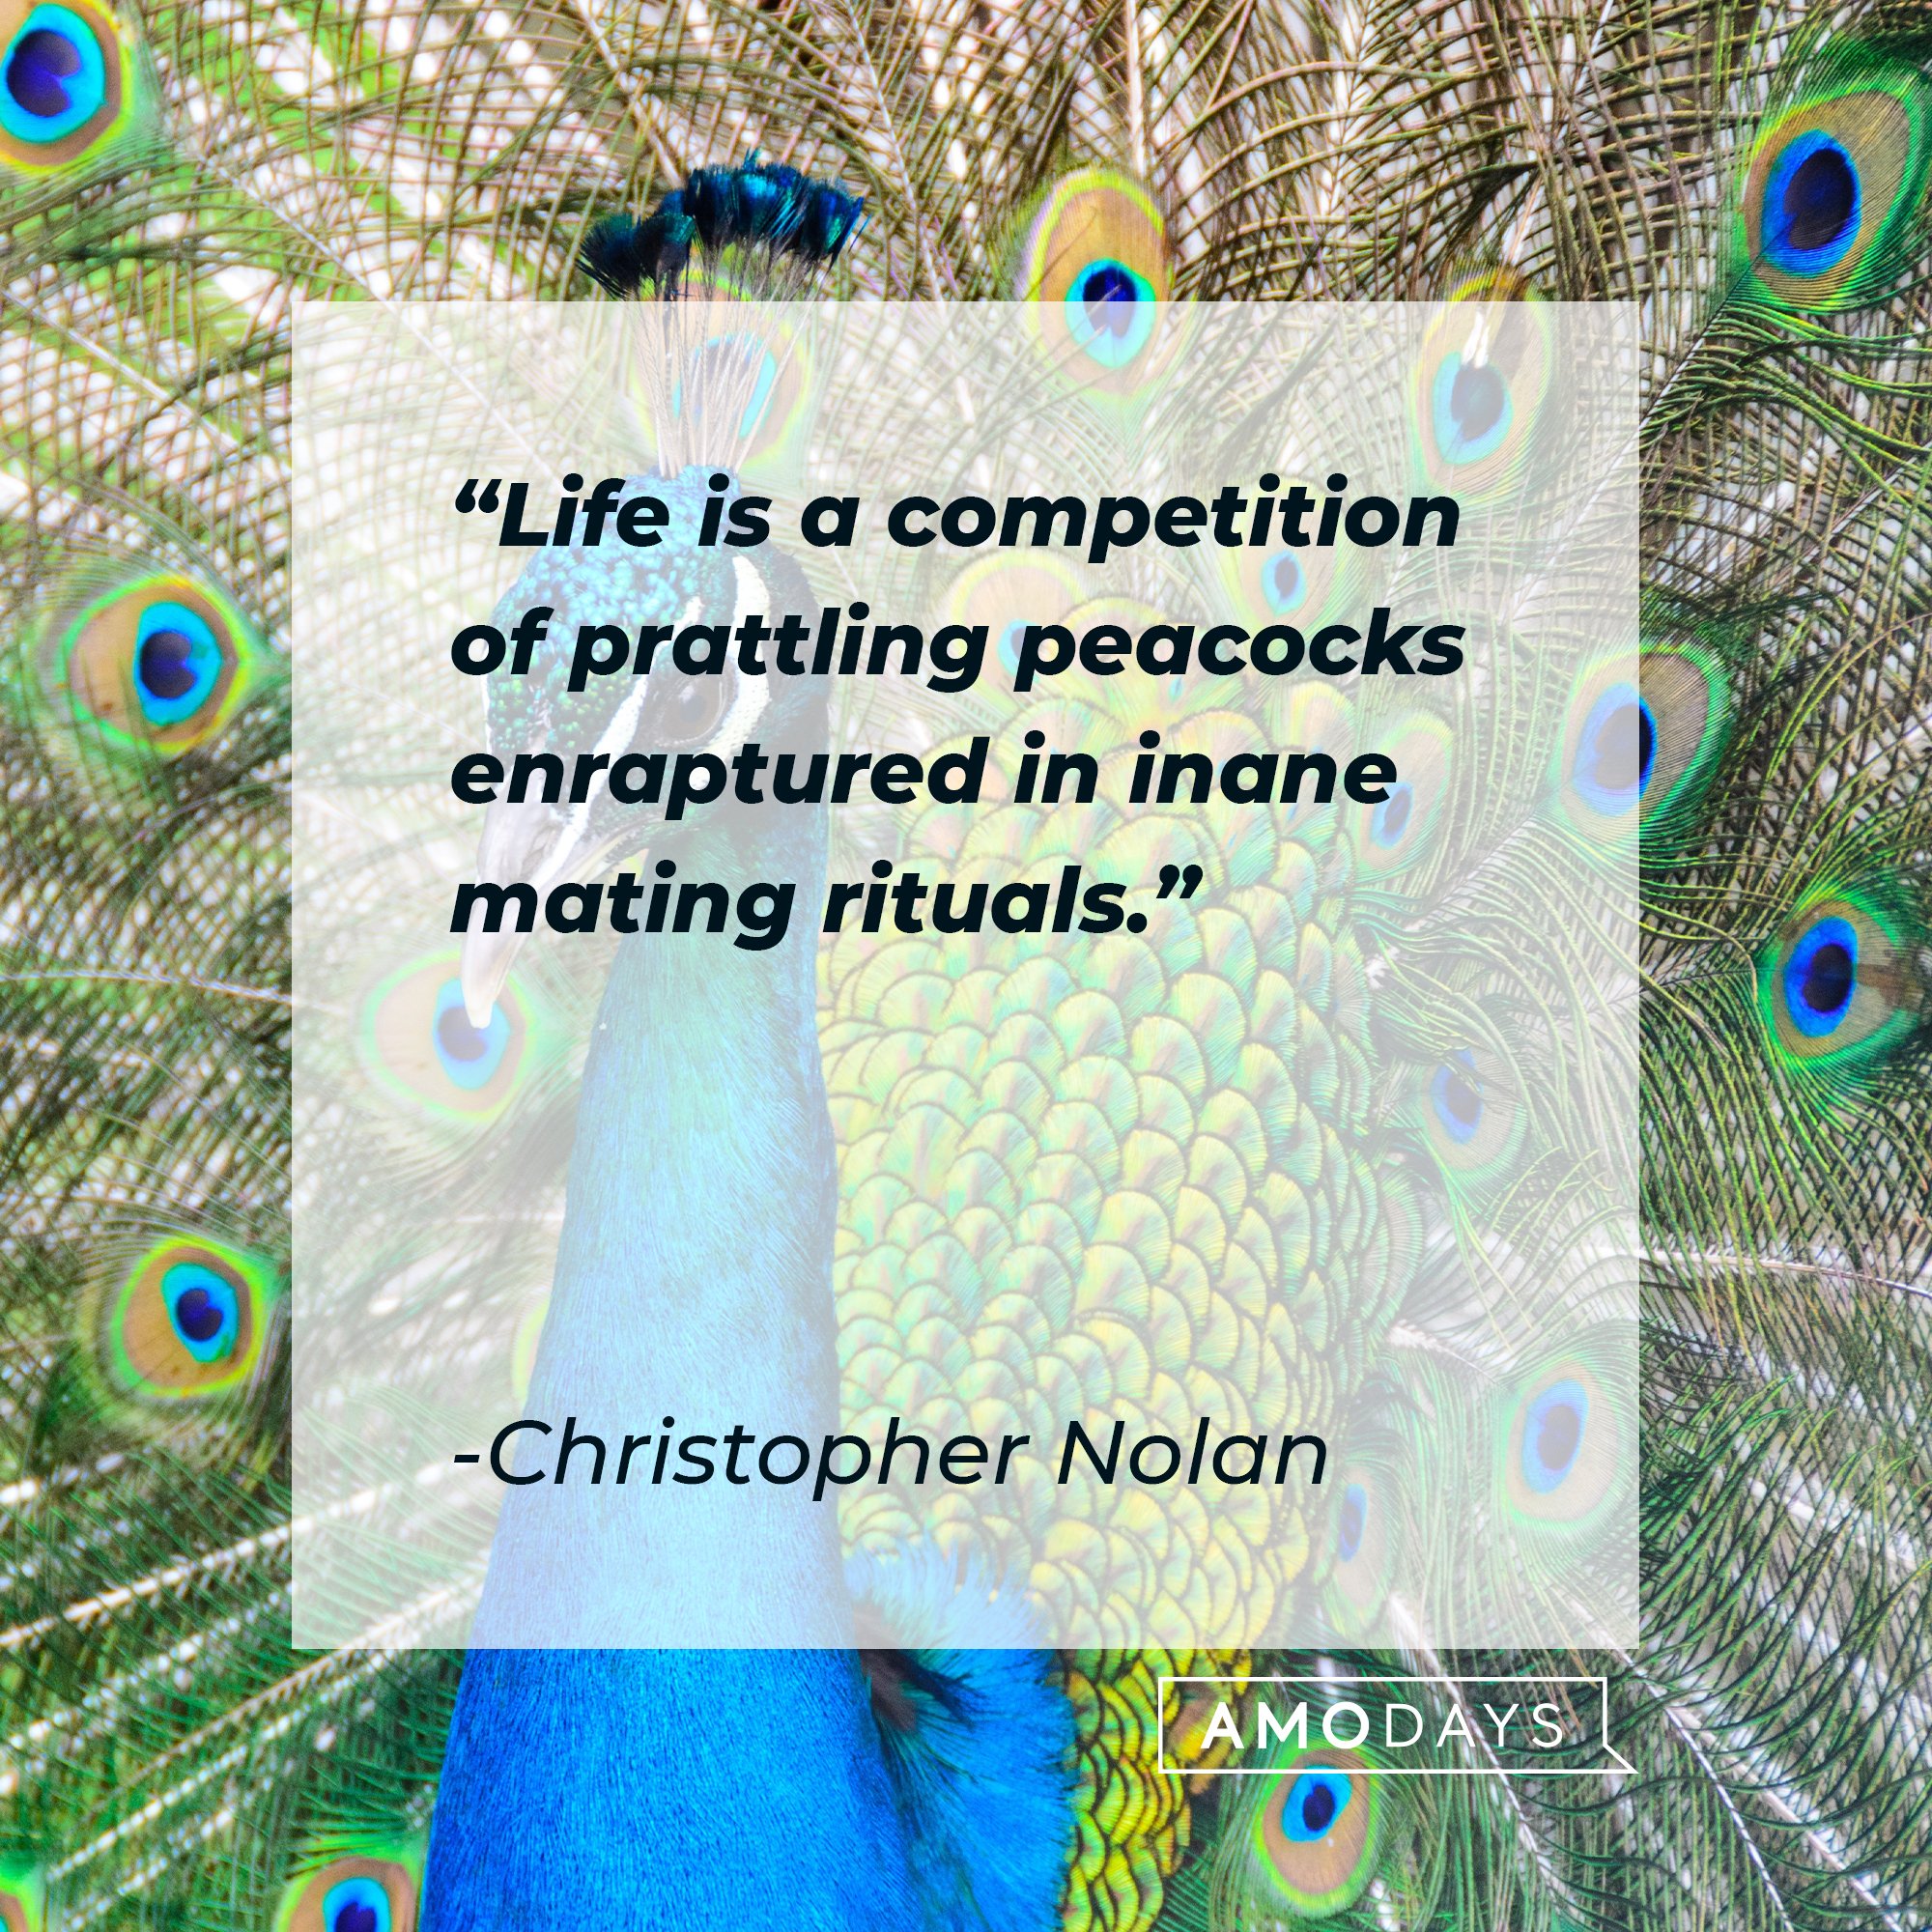 Christopher Nolan's quote: "Life is a competition of prattling peacocks enraptured in inane mating rituals." | Image: AmoDays